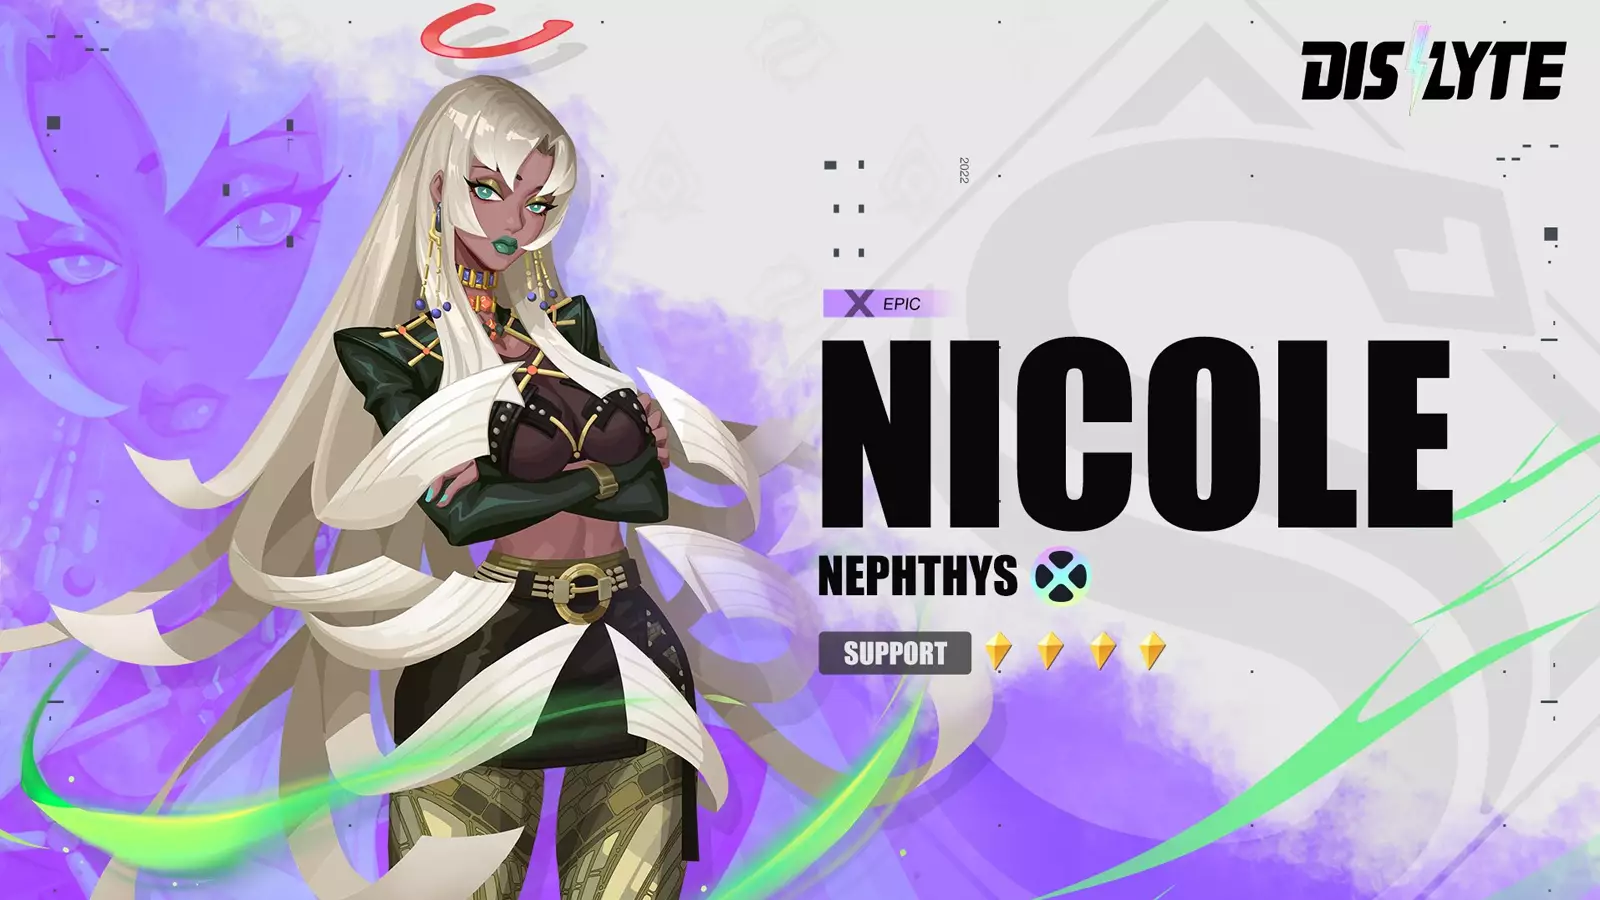 nicole (nephthys) in dislyte